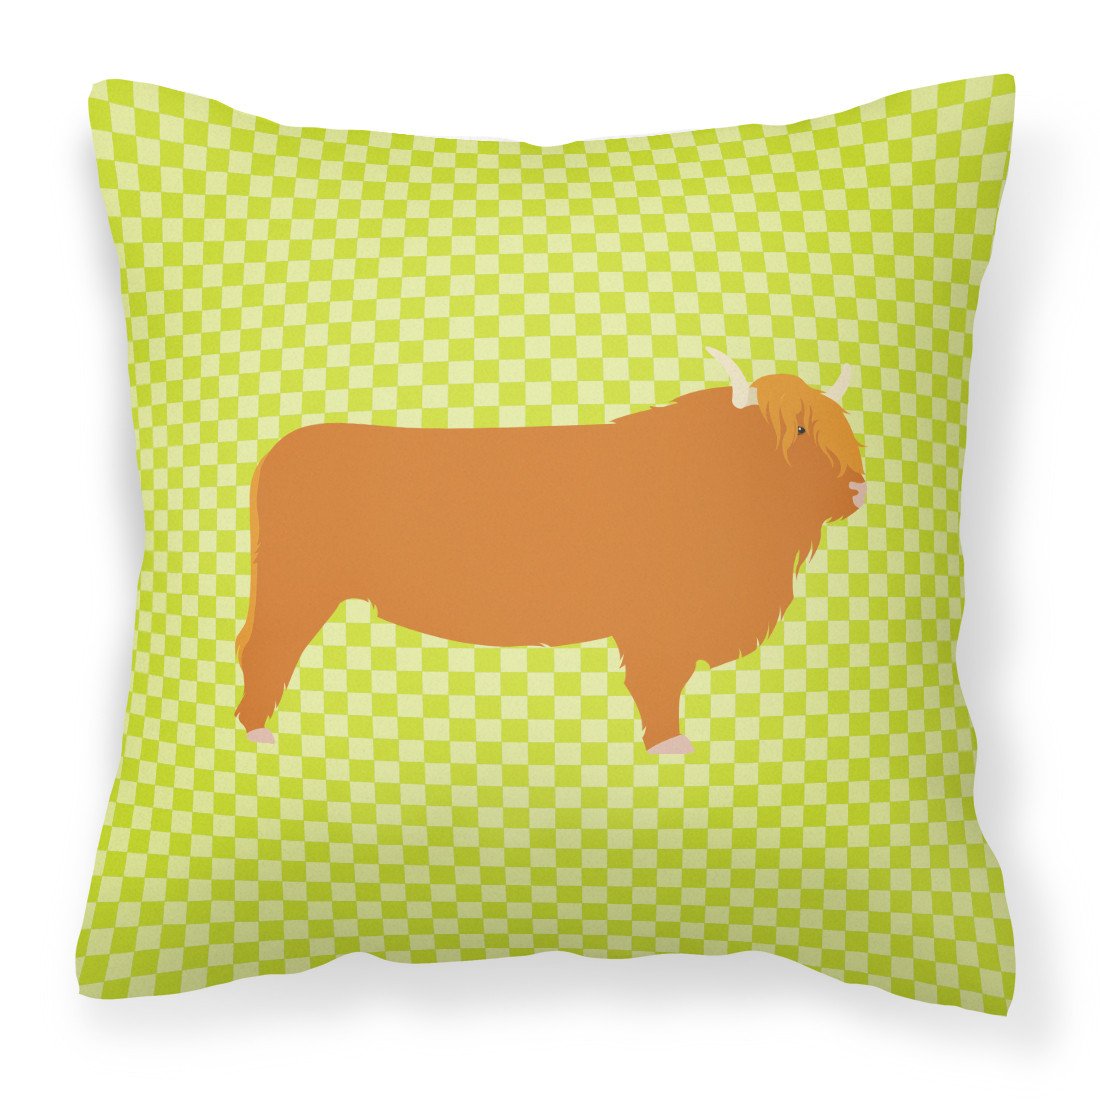 Highland Cow Green Fabric Decorative Pillow BB7646PW1818 by Caroline's Treasures